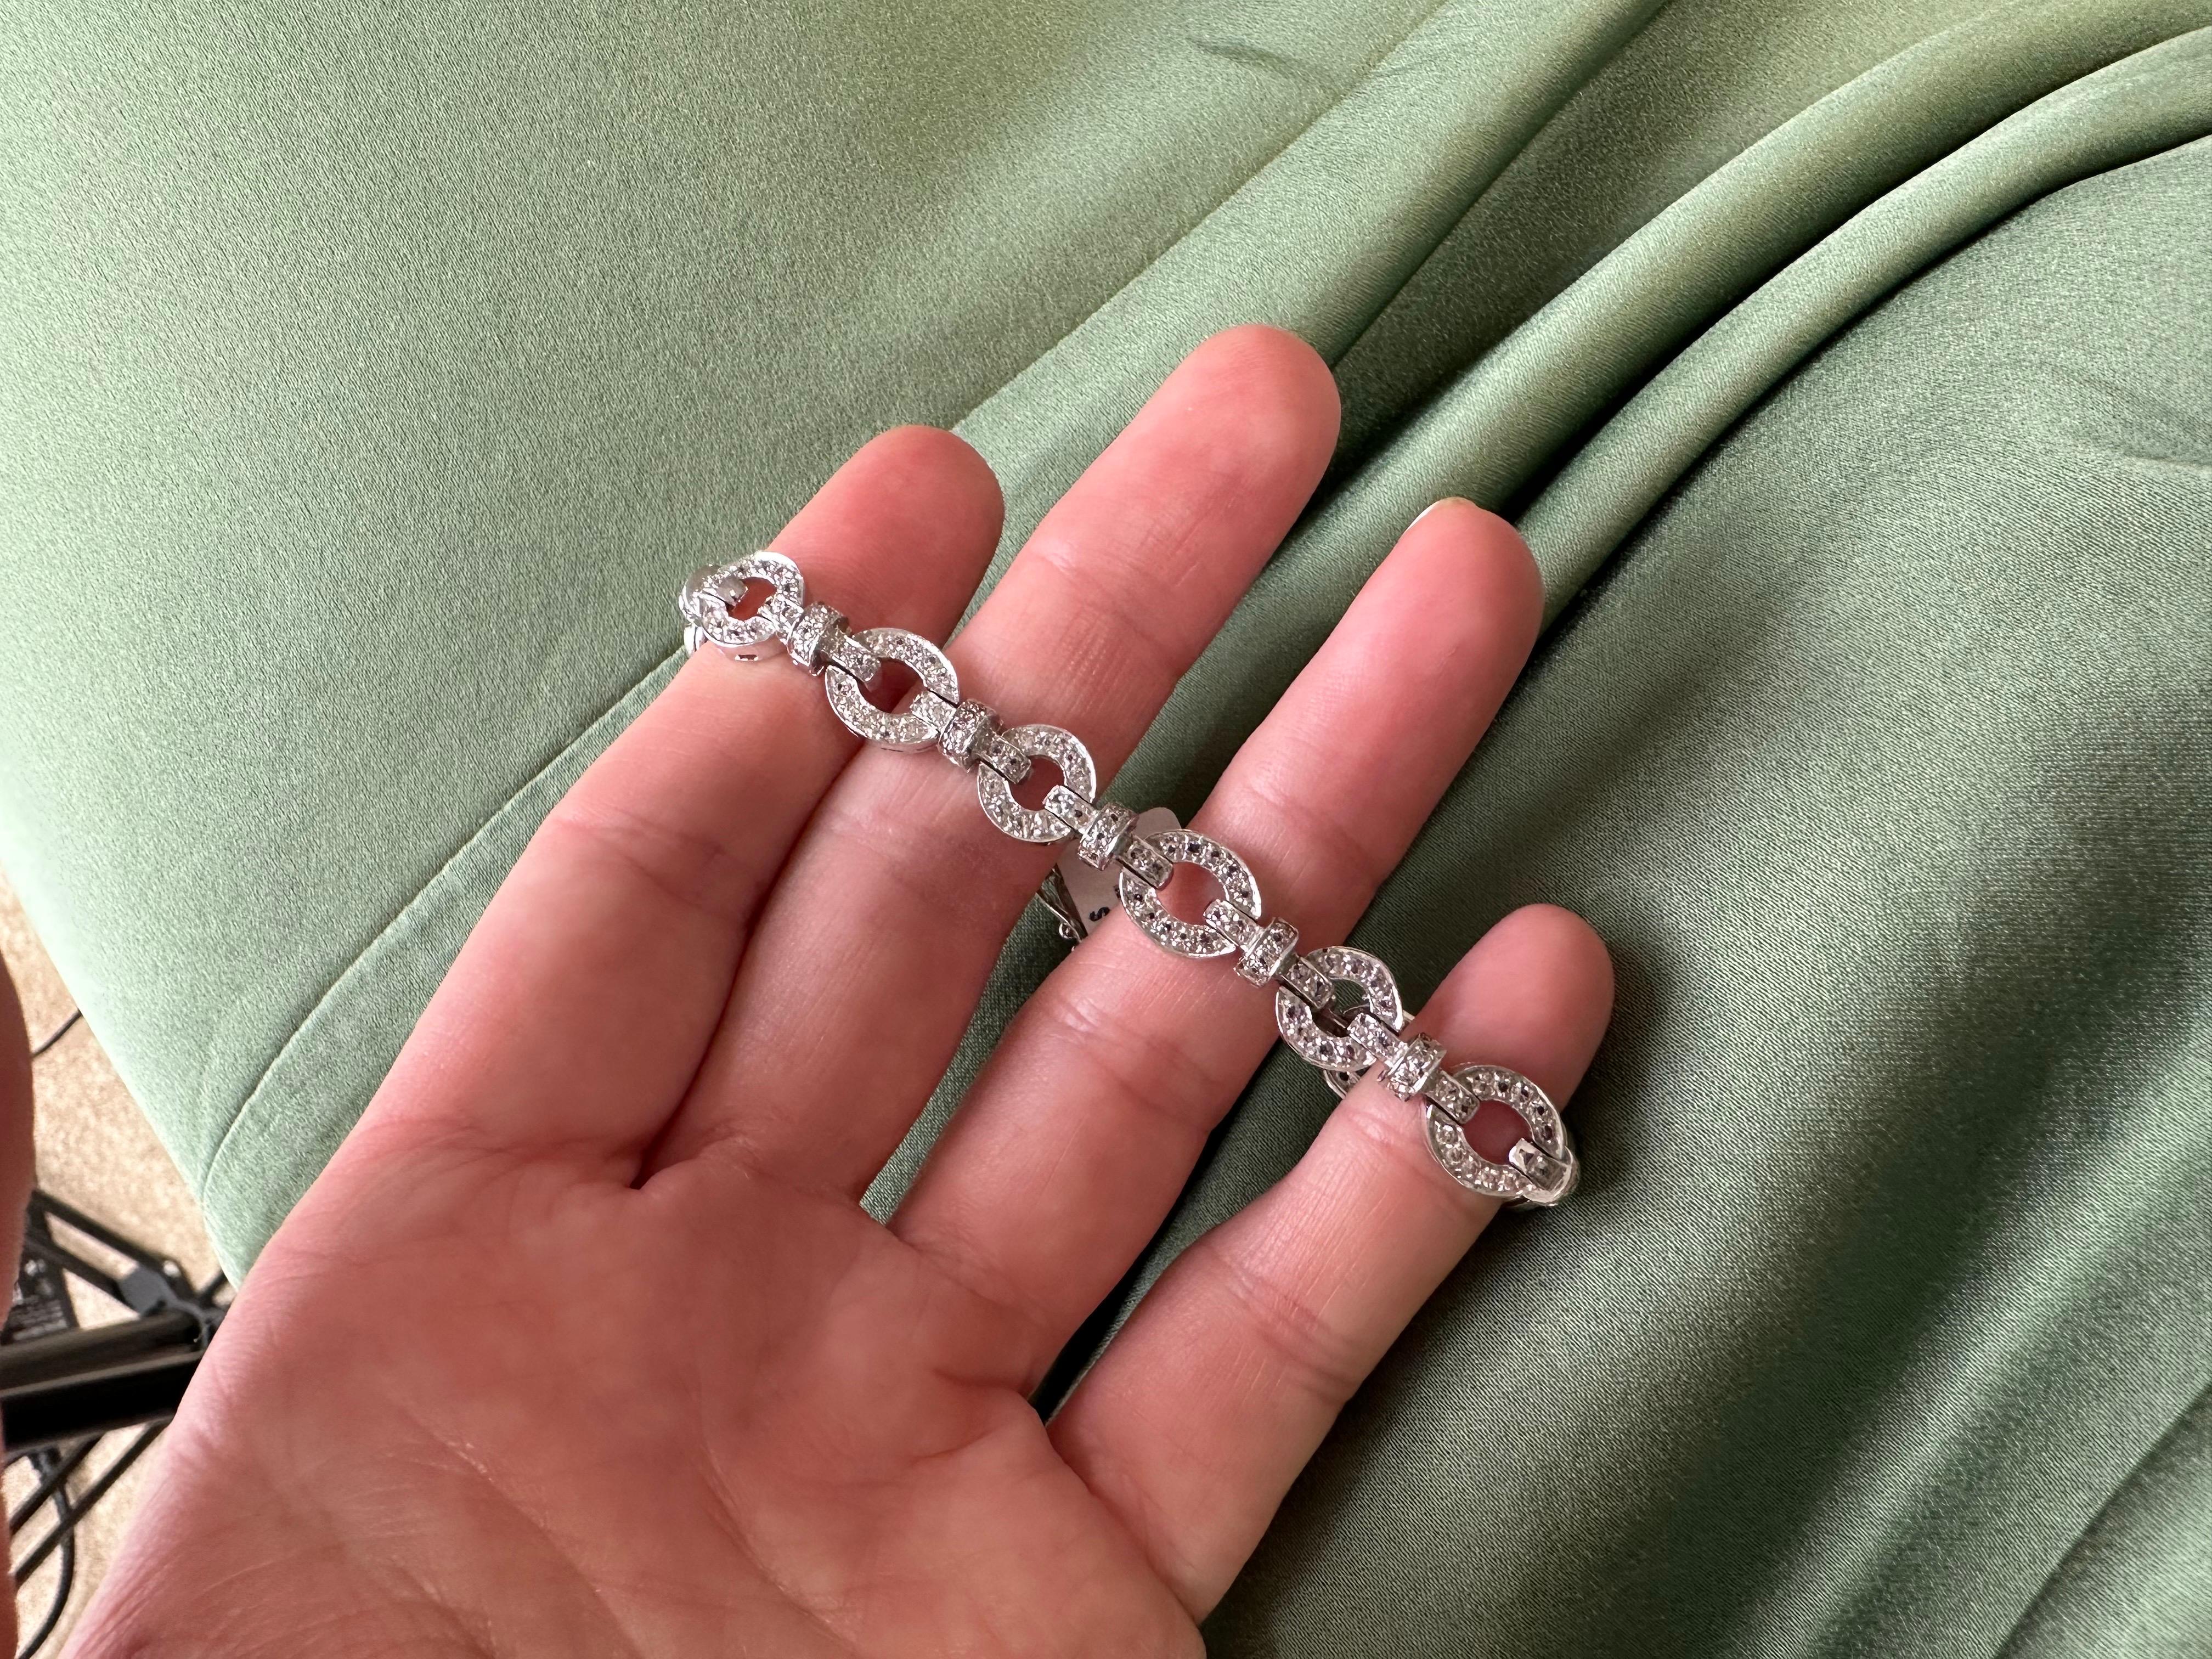 Classical tennis bracelet with Victorian design in 18Kt gold made with over 3 carats of diamodns!



CENTER STONE: NATURAL DIAMONDS
CARAT: 3.03CT
CLARITY: VS-SI
COLOR: G
CUT: ROUND BRILLIANT

GRAM WEIGHT: 23gr
GOLD: 18KT yellow gold


WHAT YOU GET